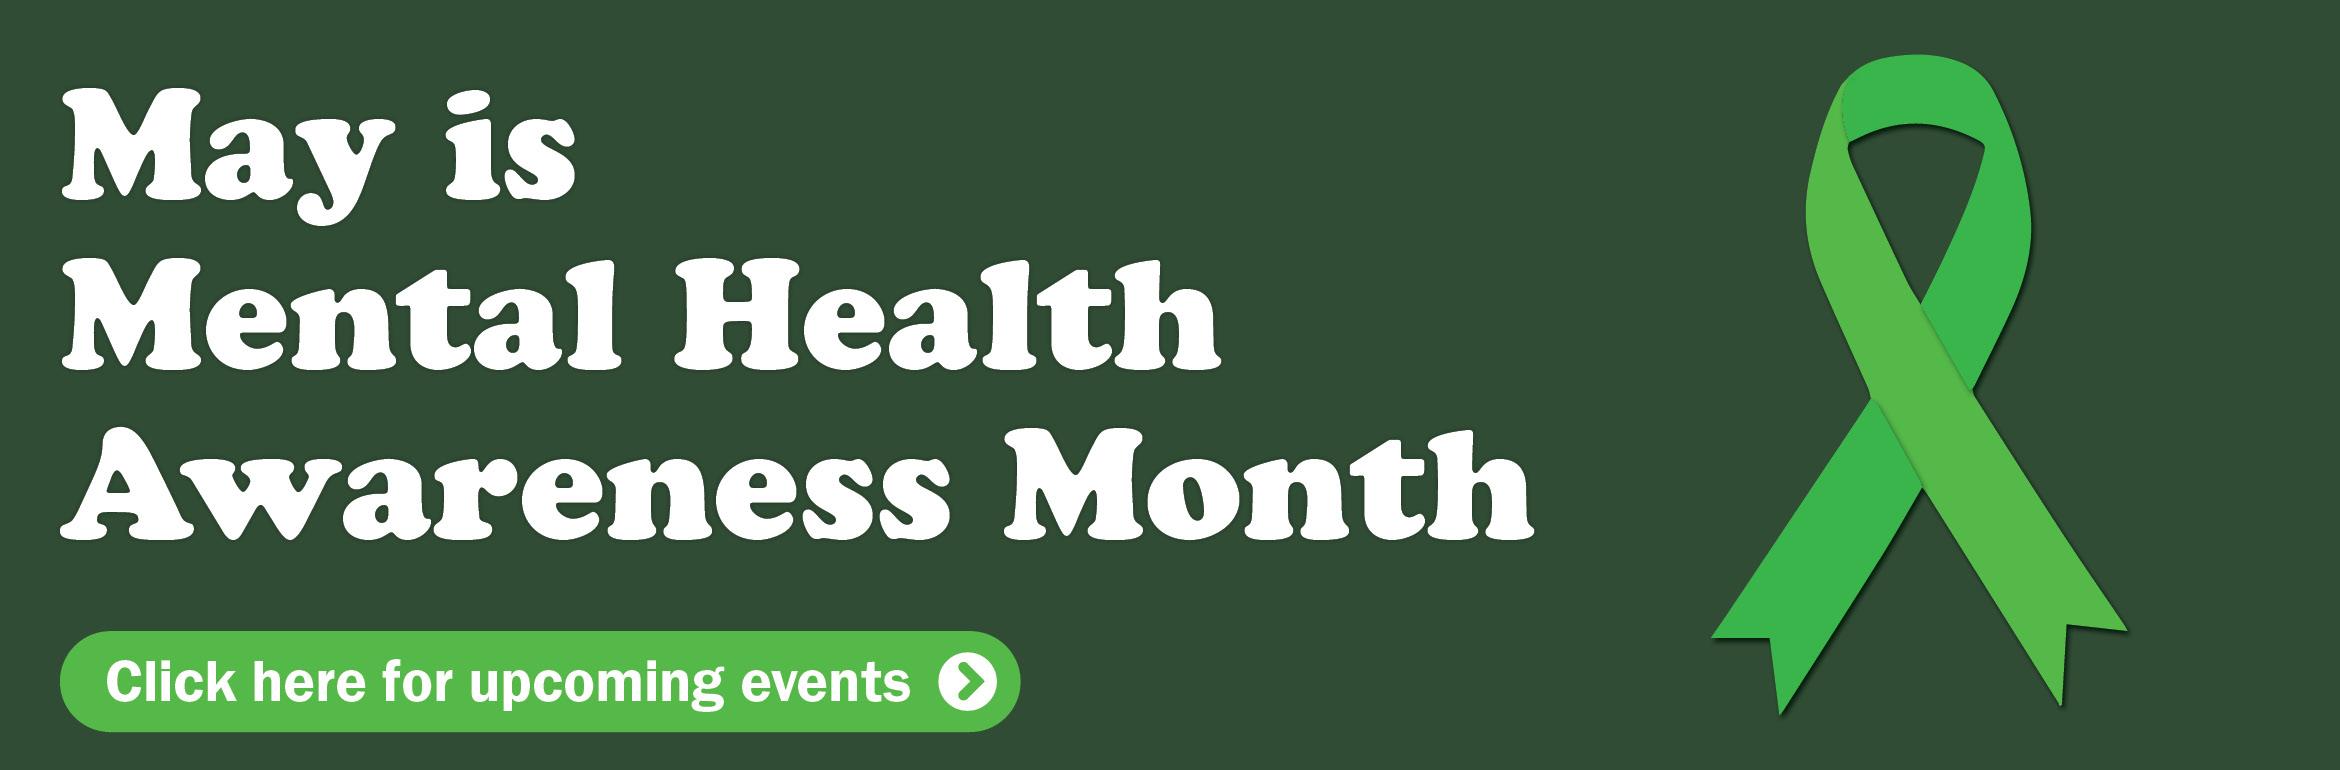 May is Mental Health Awareness Month. Click here for upcoming events.